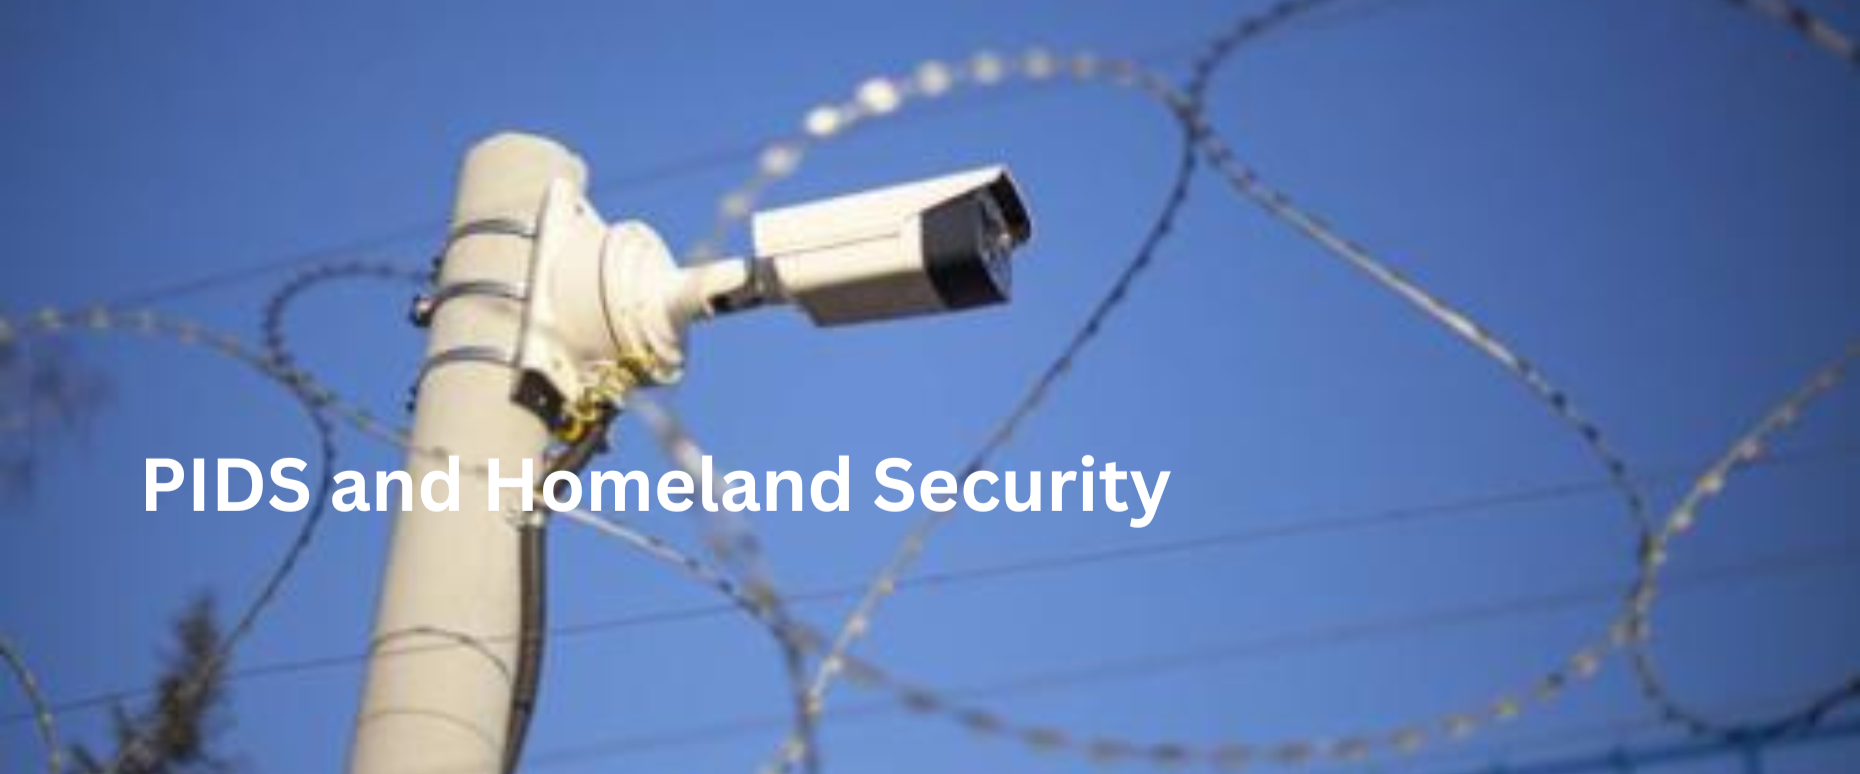 PIDS and Homeland Security (1)